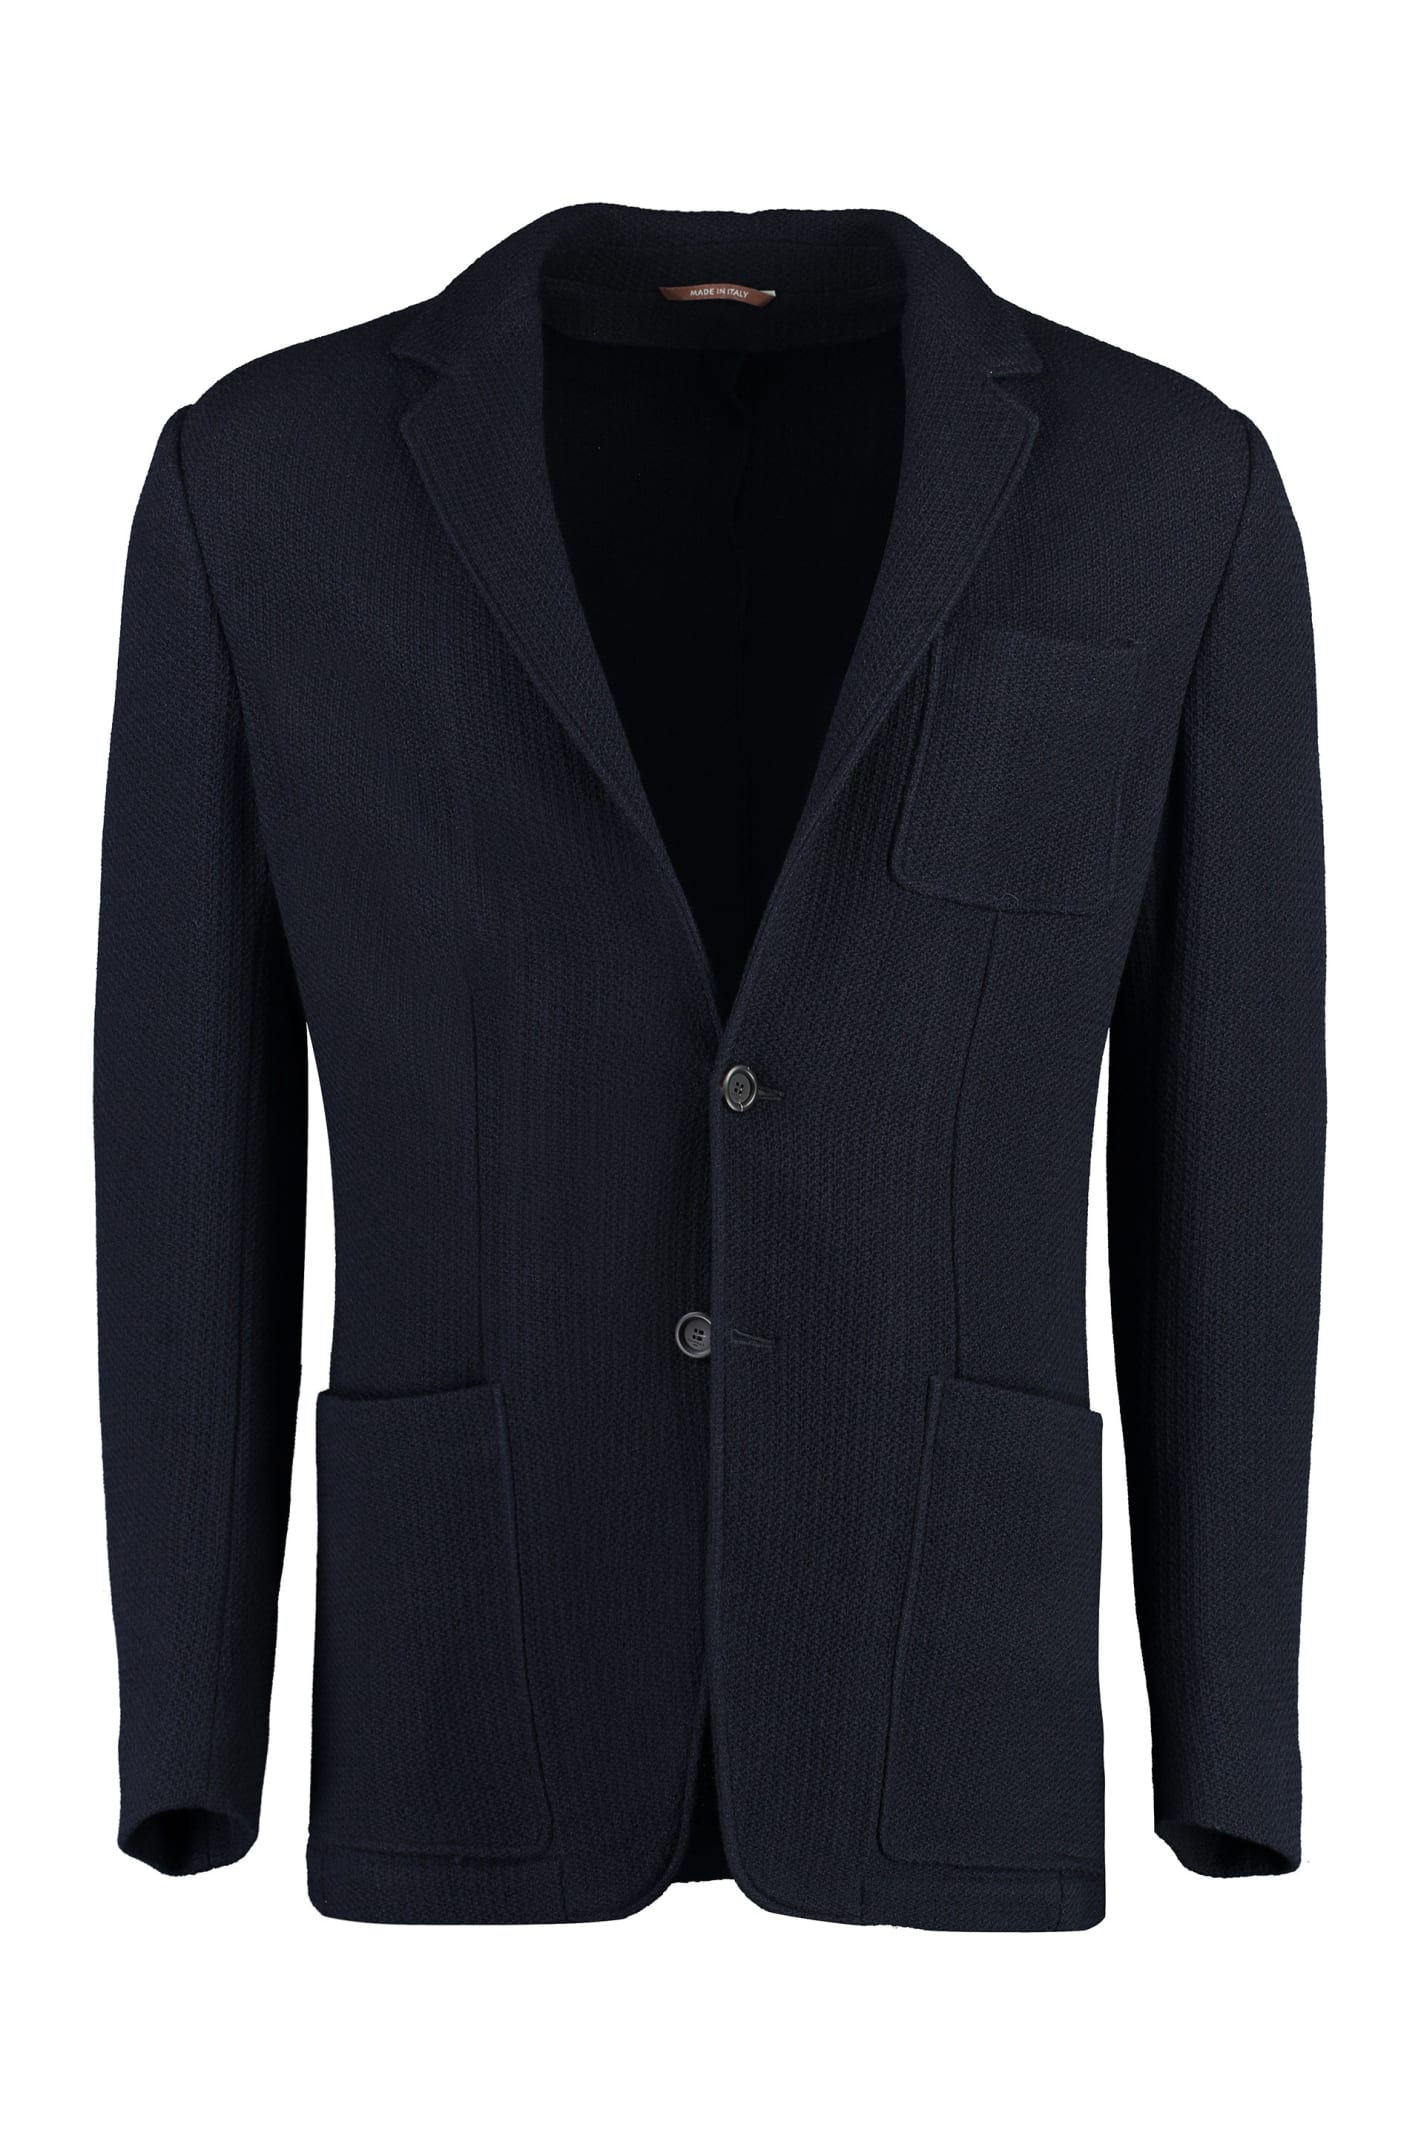 CANALI SINGLE-BREASTED WOOL JACKET